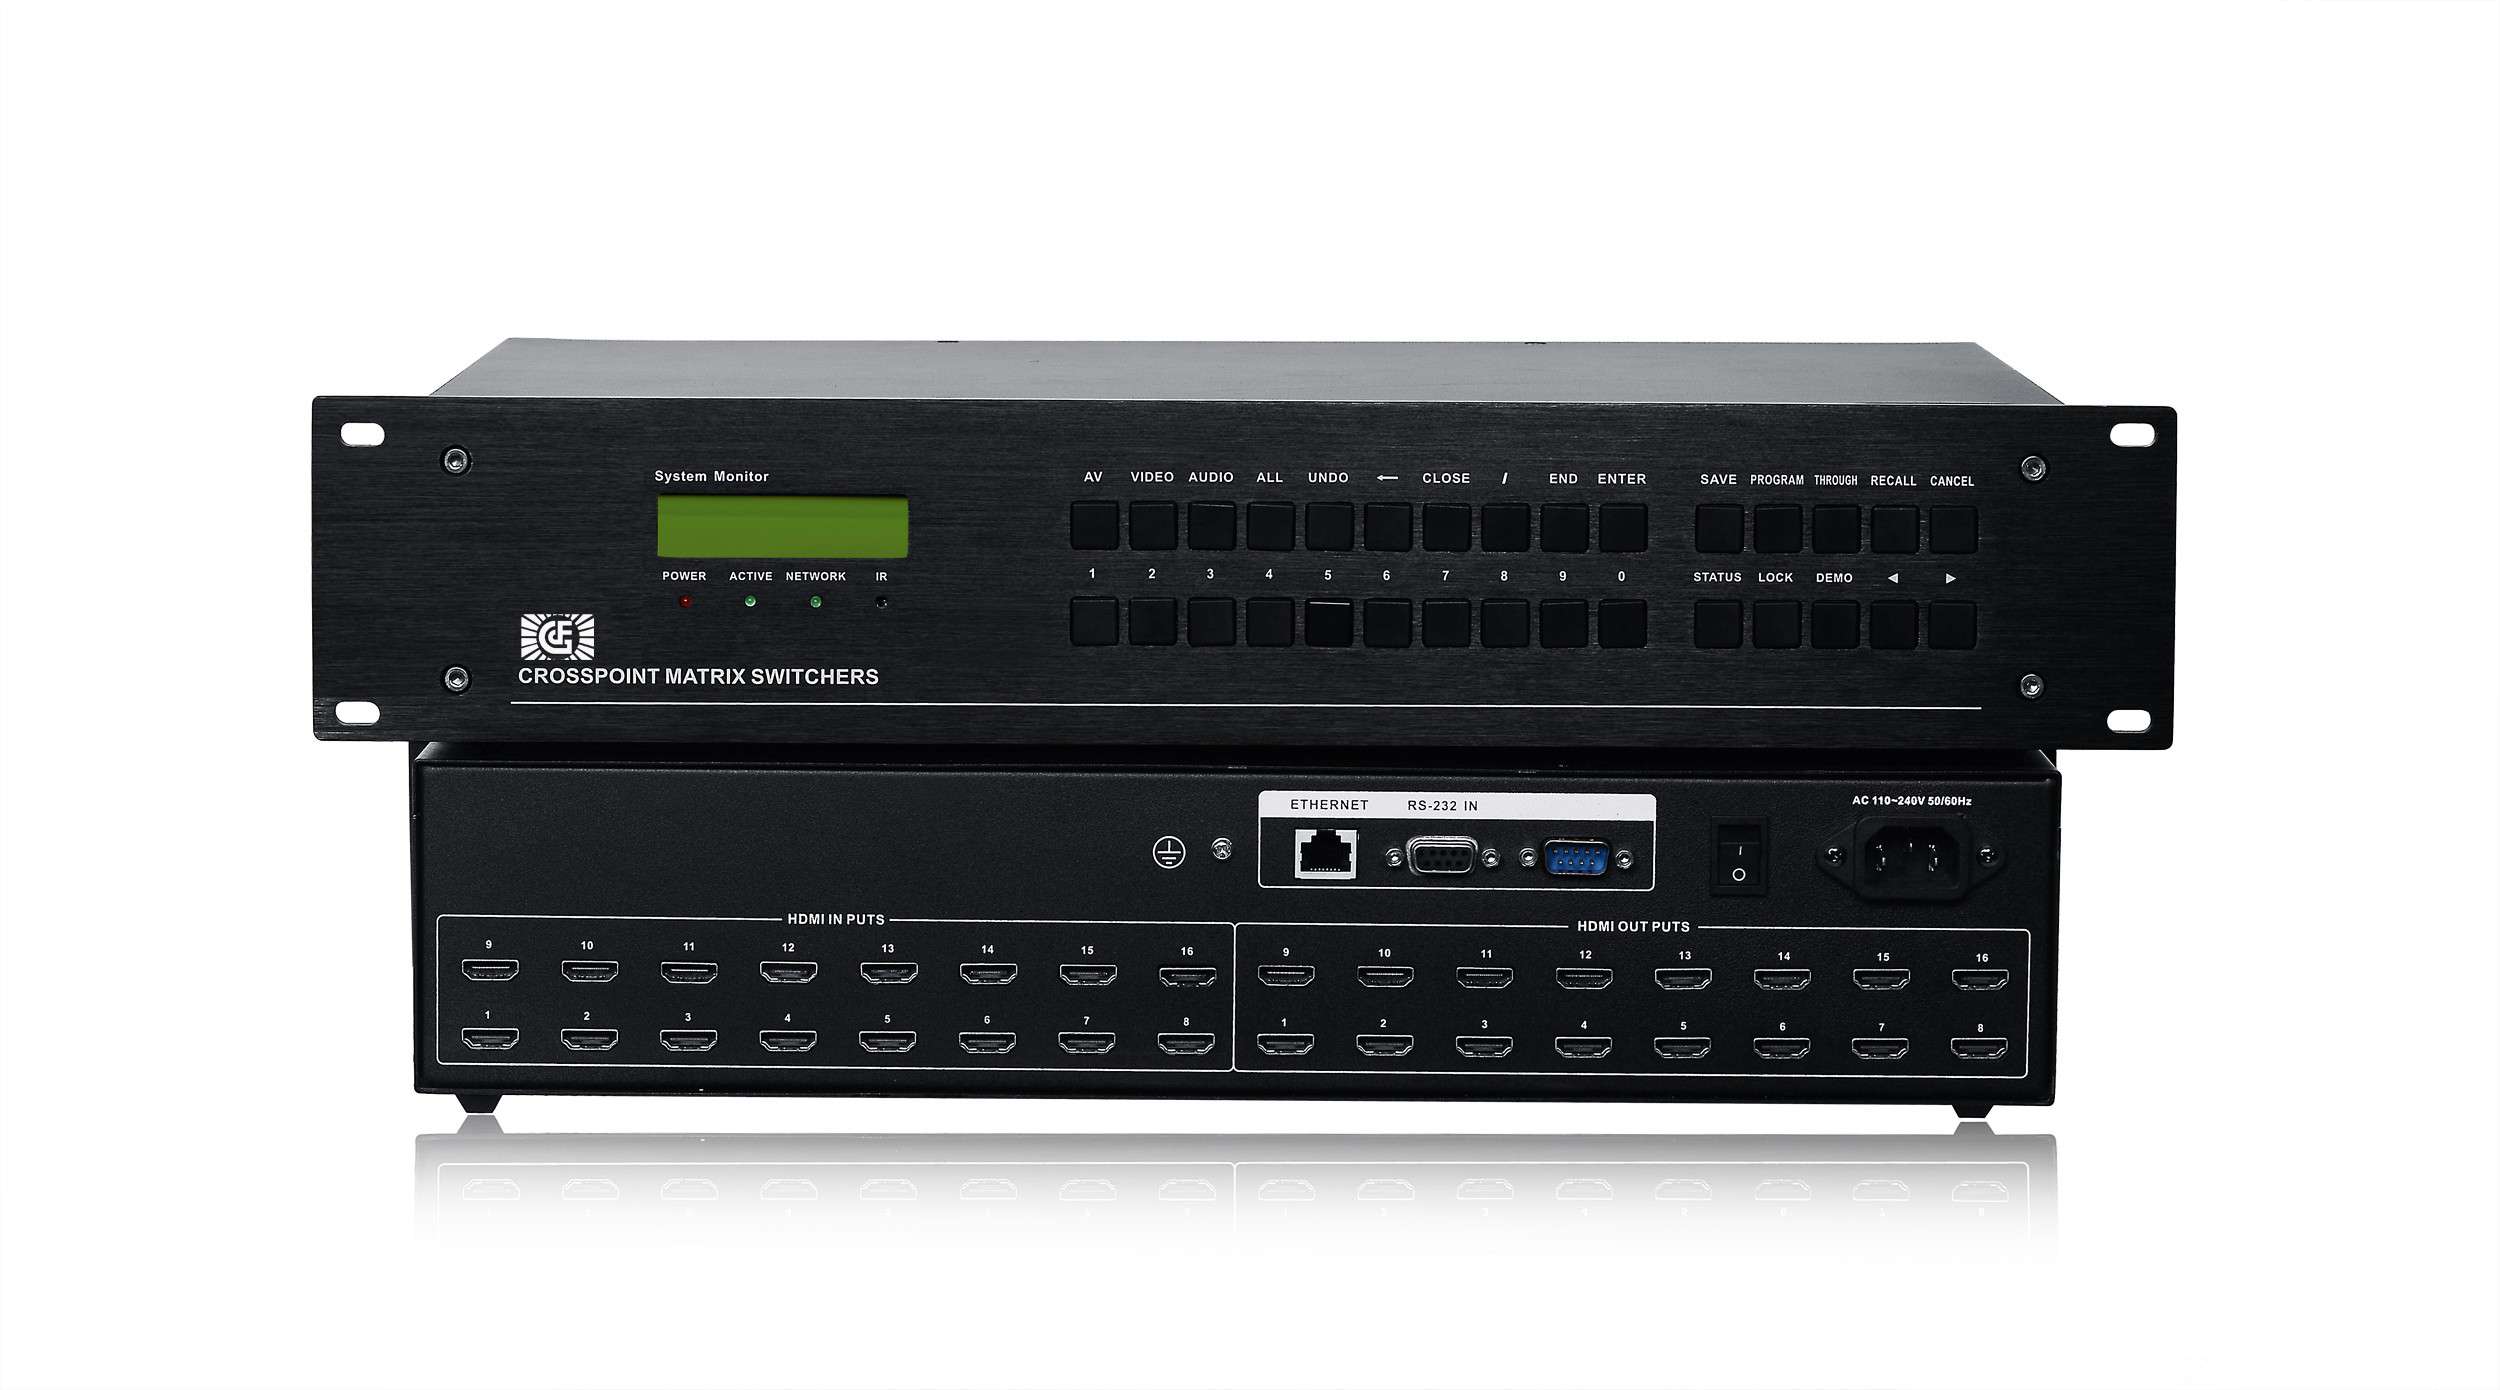  16 channels, 16 input and 16 output HDMI video ma